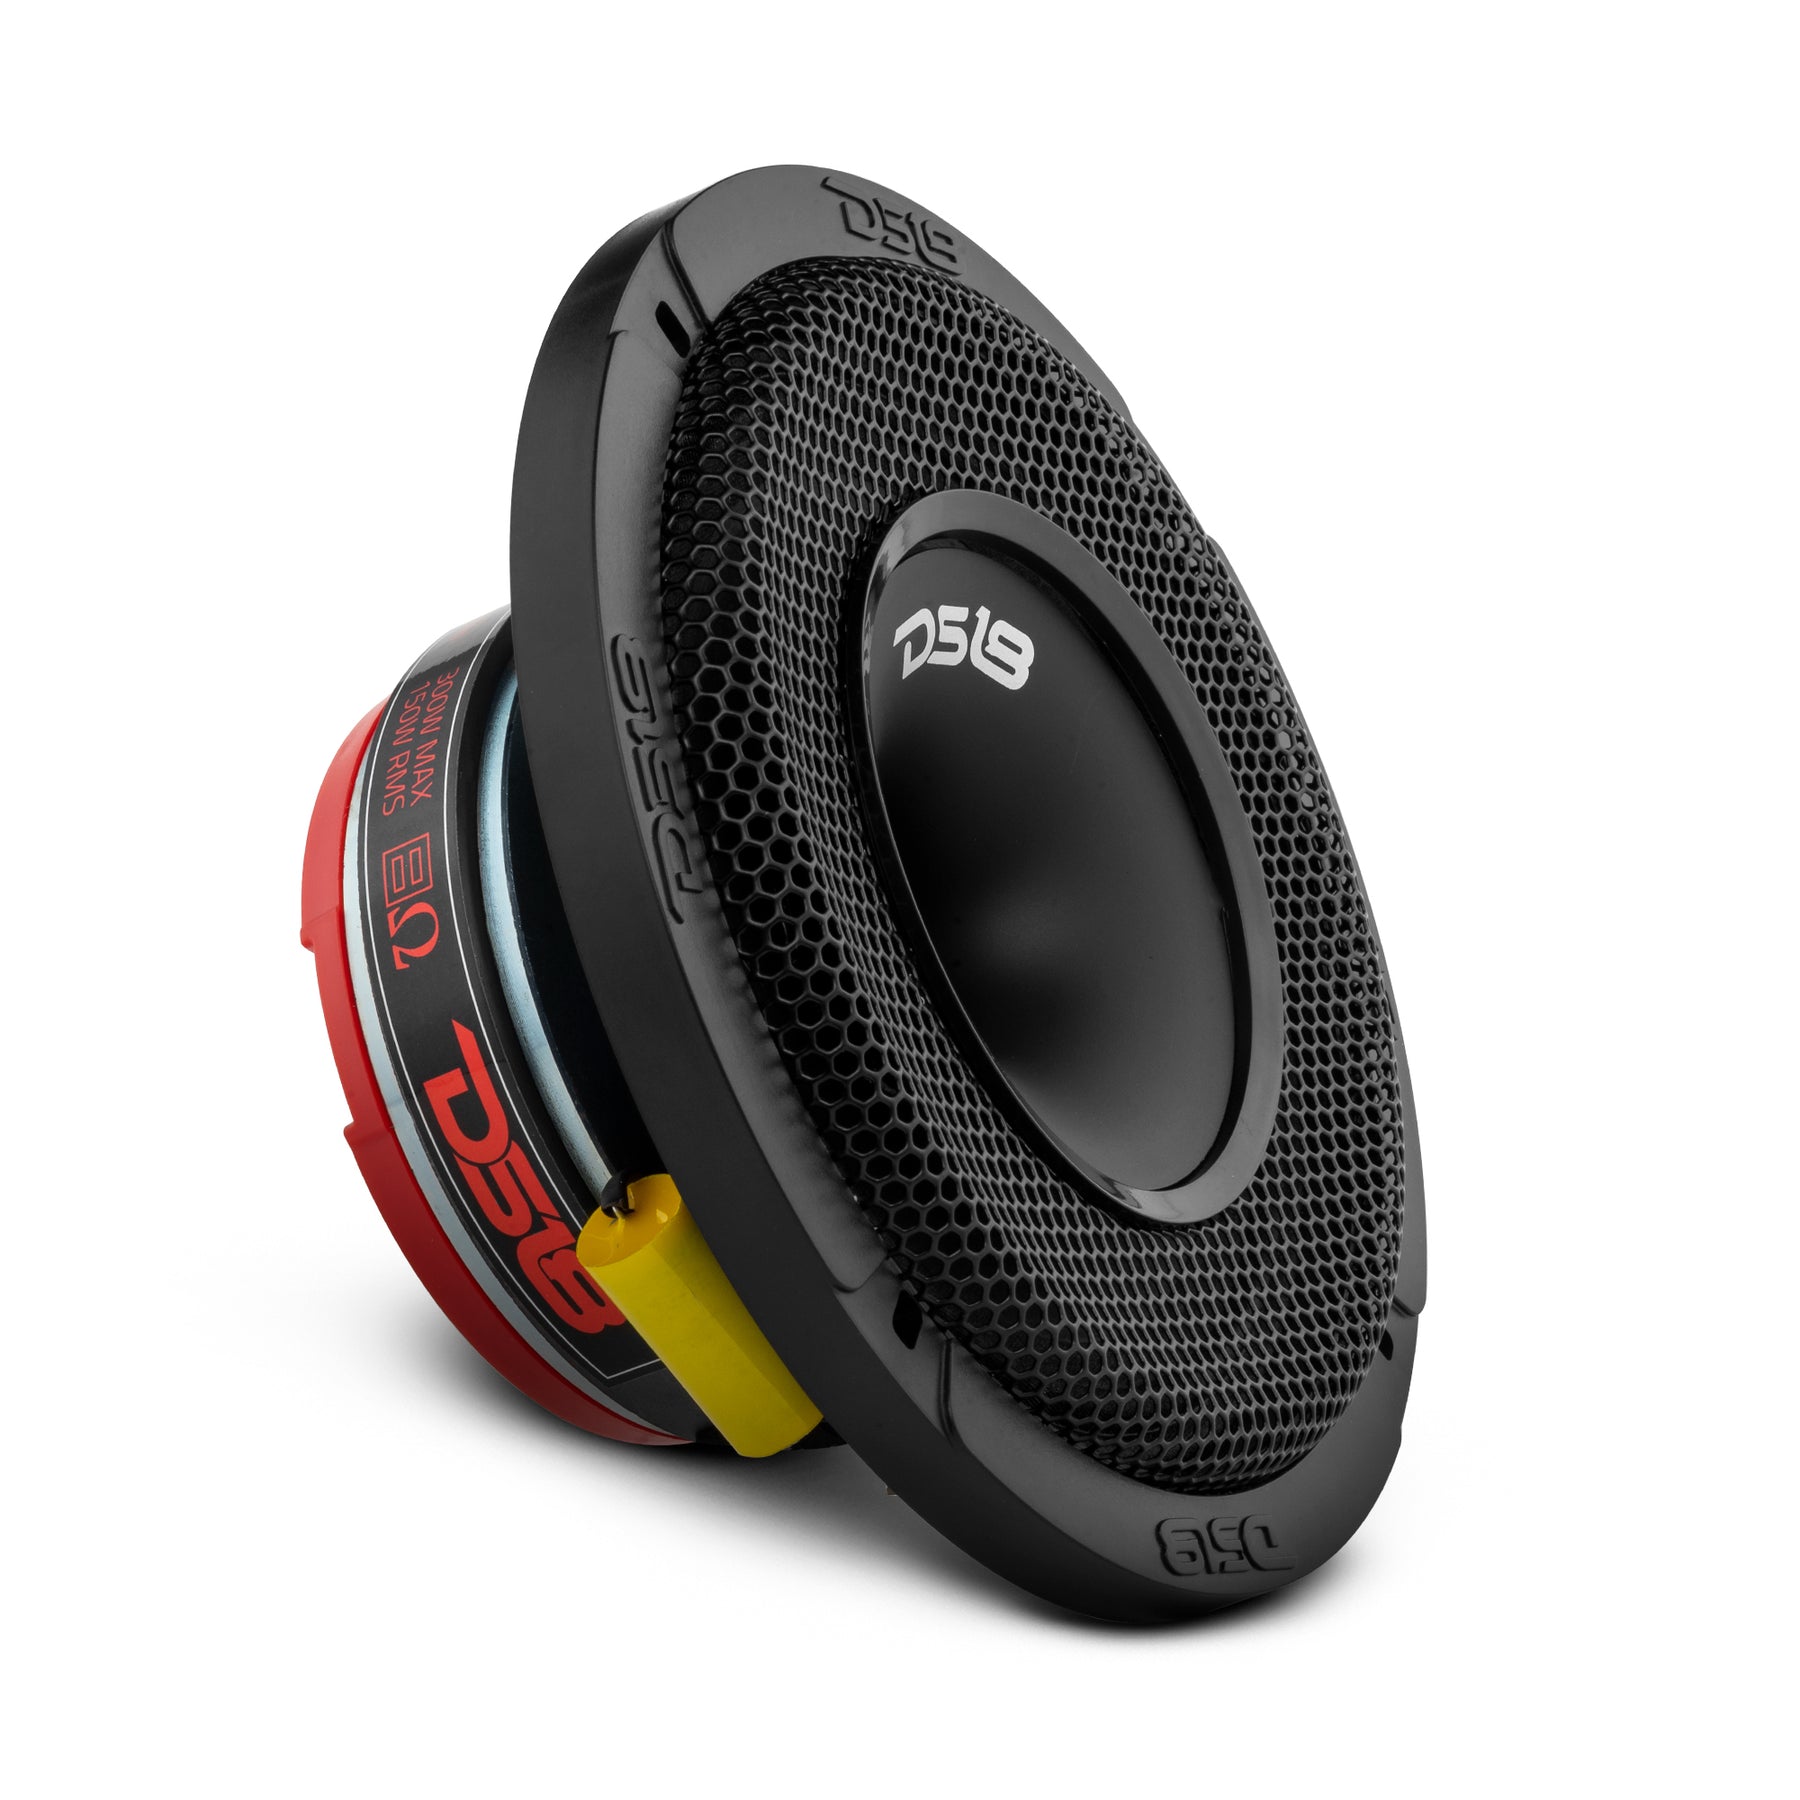 PRO 6.5" Shallow Coaxial Hybrid Mid-Range Loudspeaker with Built-in Driver 150 Watts Rms 8-Ohm